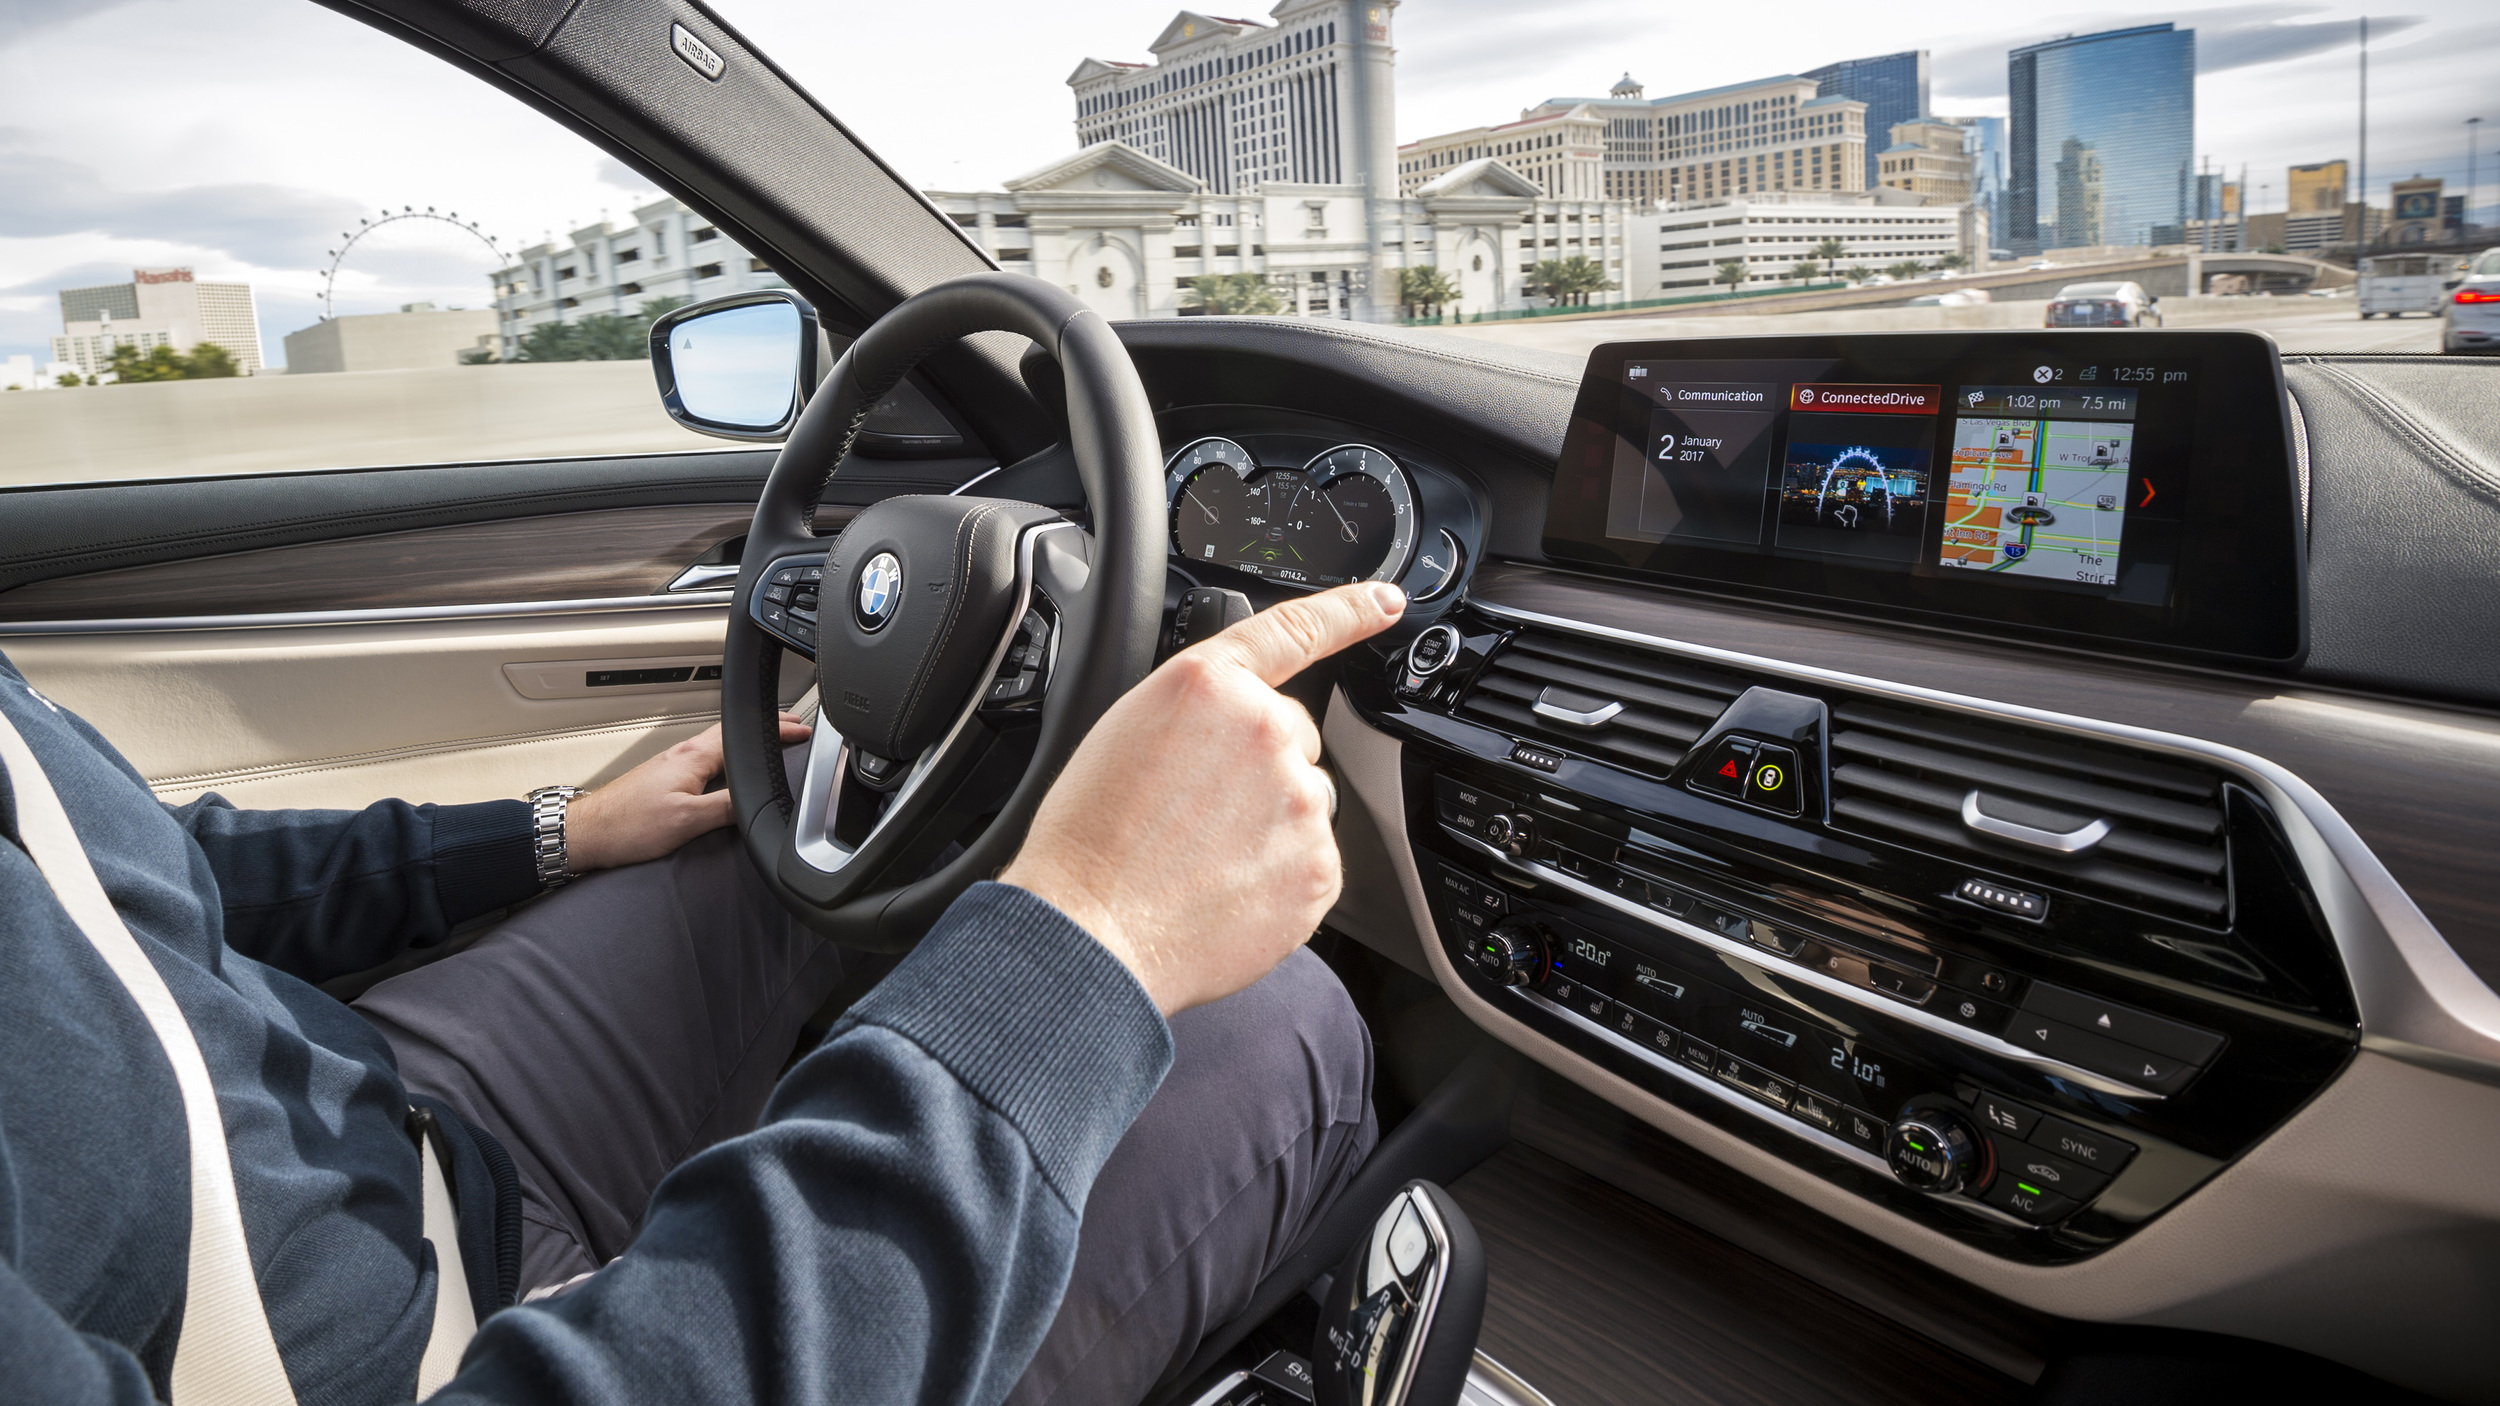 BMW: Go Ahead, Take Your Hands Off The Wheel Of Our 5 Series Prototype, It’s Fine